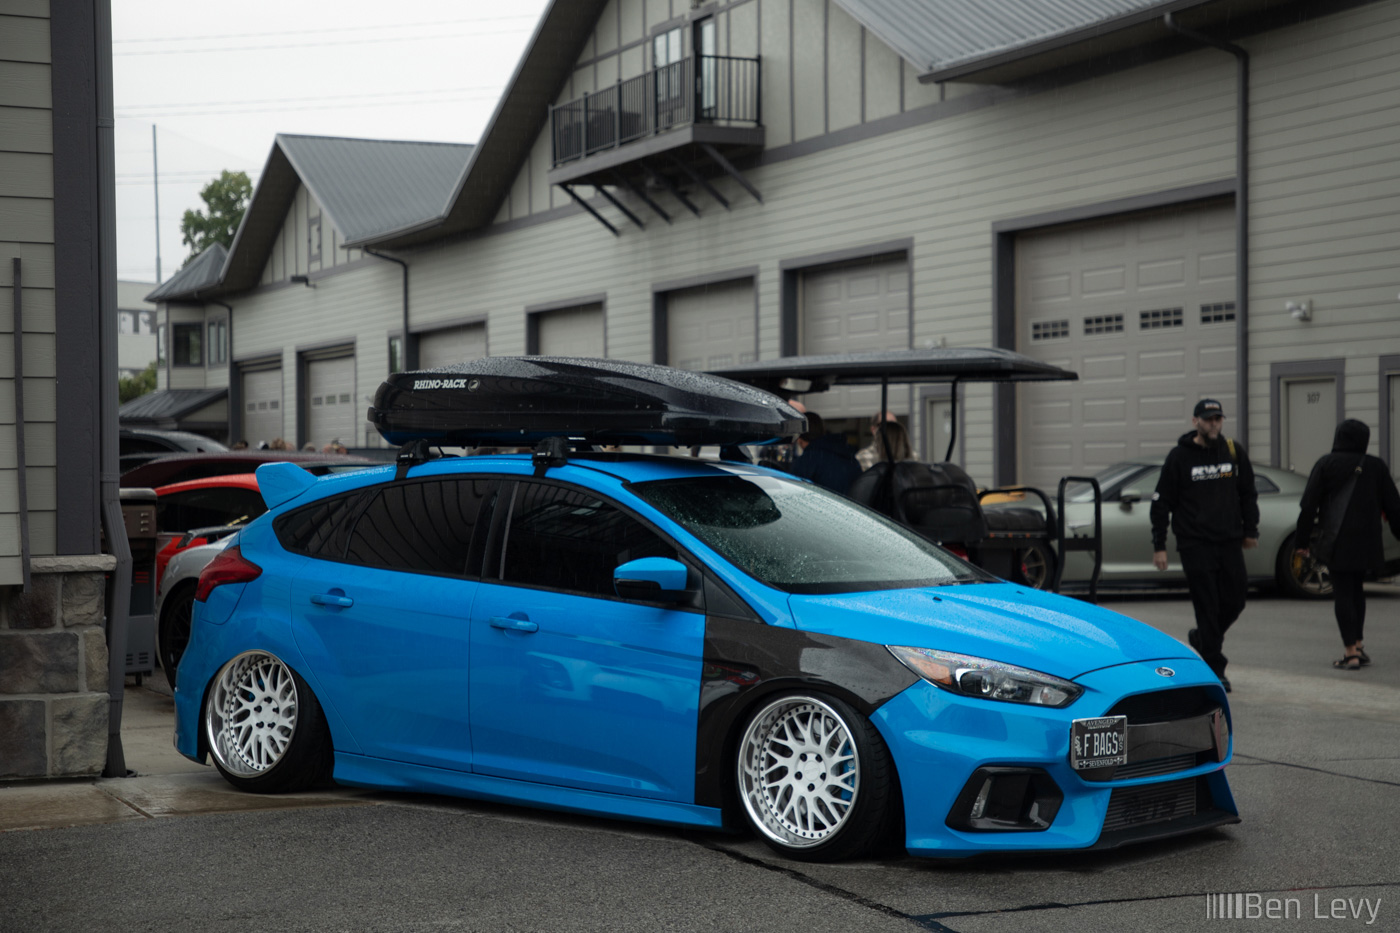 Slammed Ford Focus RS at Iron Gate